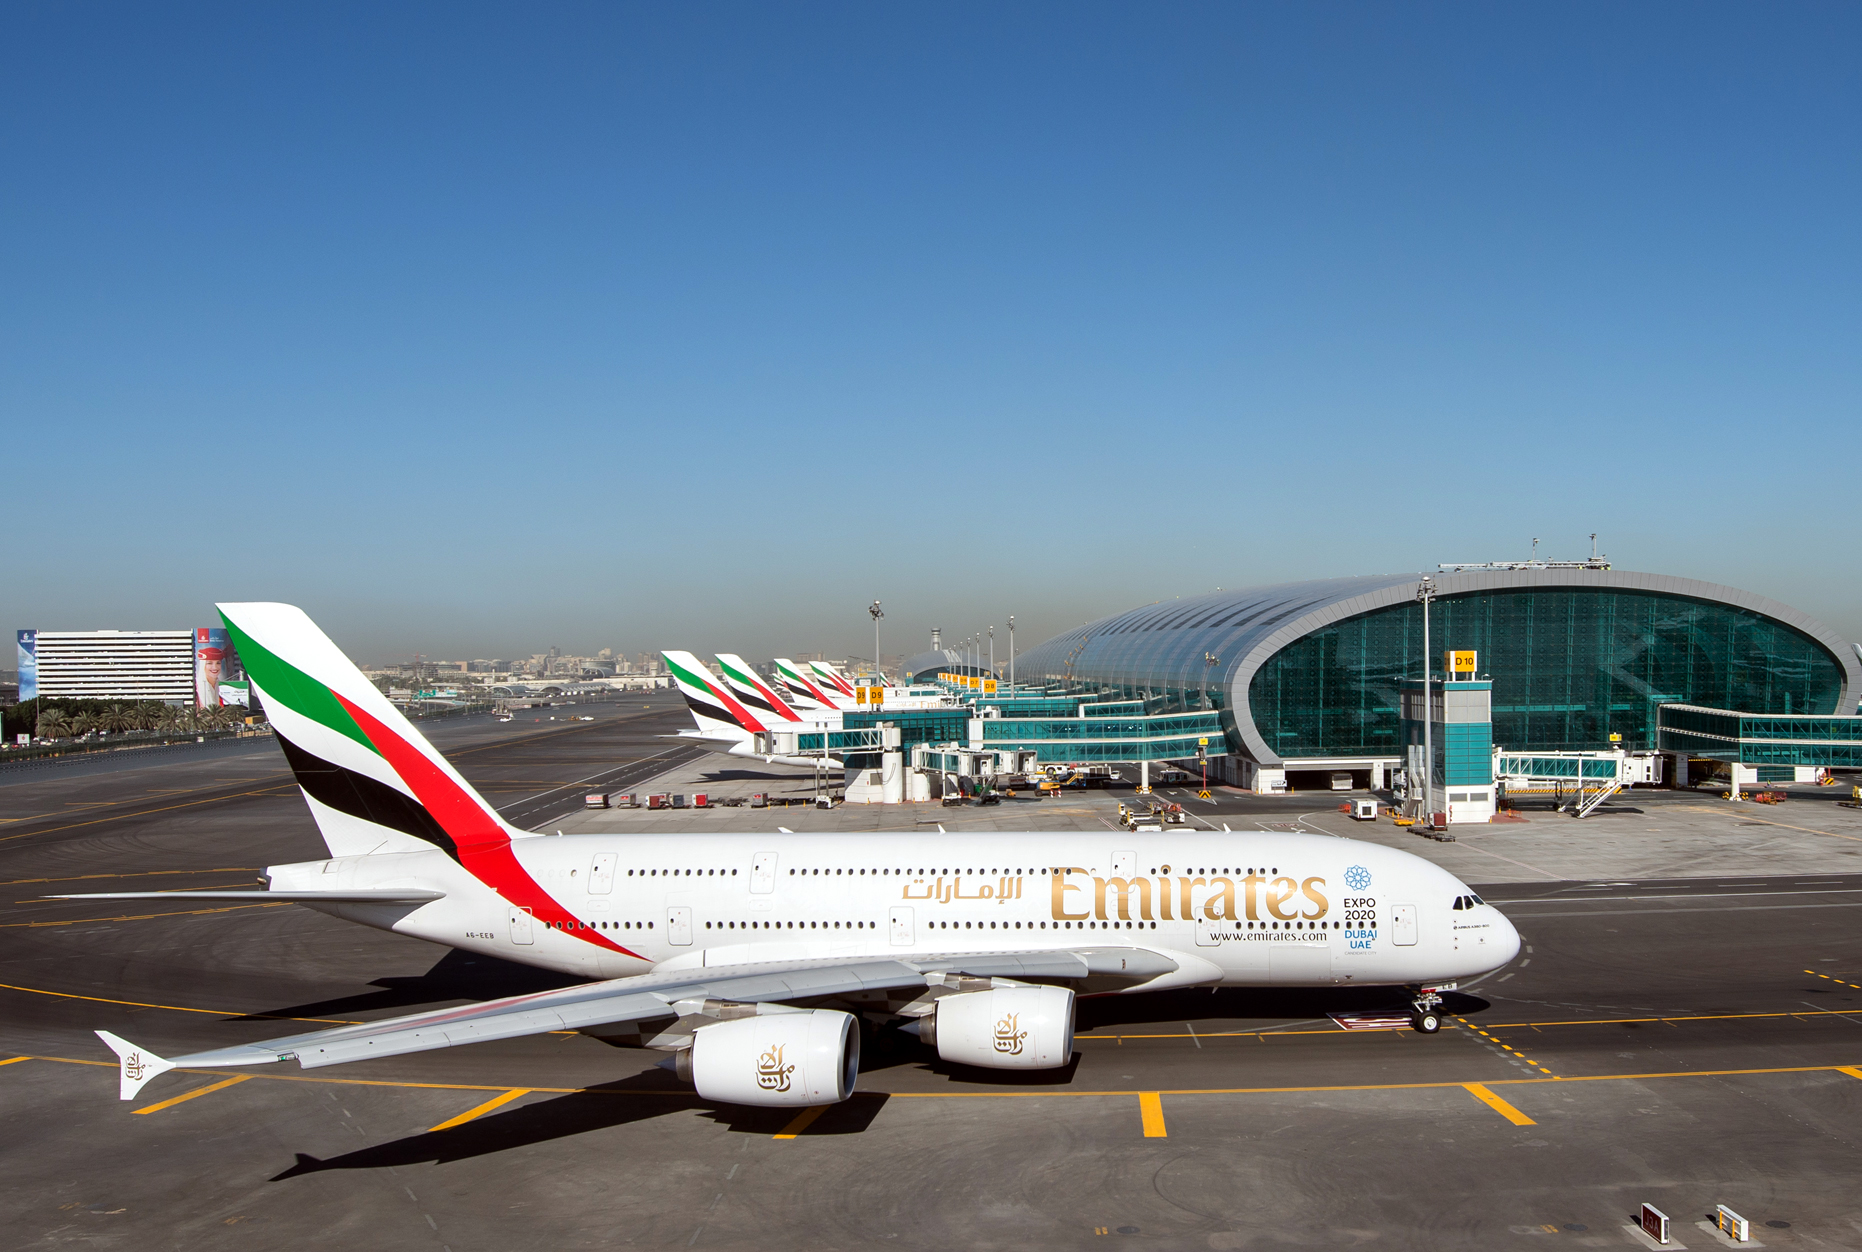 The Emirates Recruitment Crisis Gets Worse - Now Business Class Cabin Crew Are Back Filling in Economy